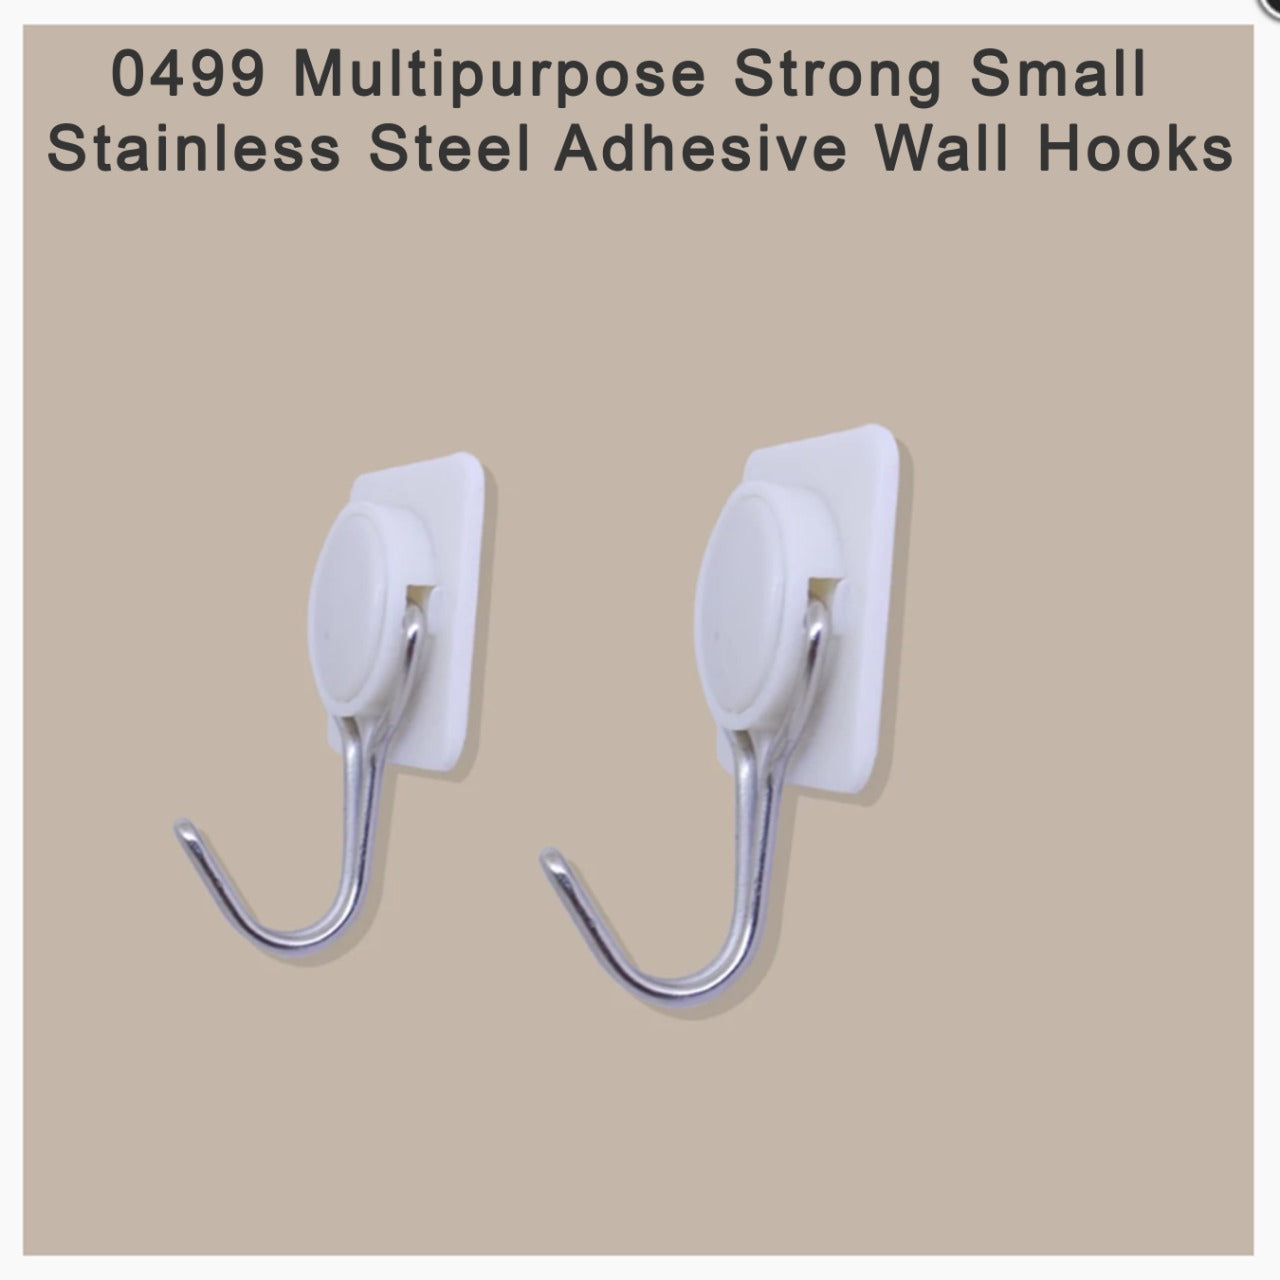 0499 Multipurpose Strong Small Stainless Steel Adhesive Wall Hooks DeoDap